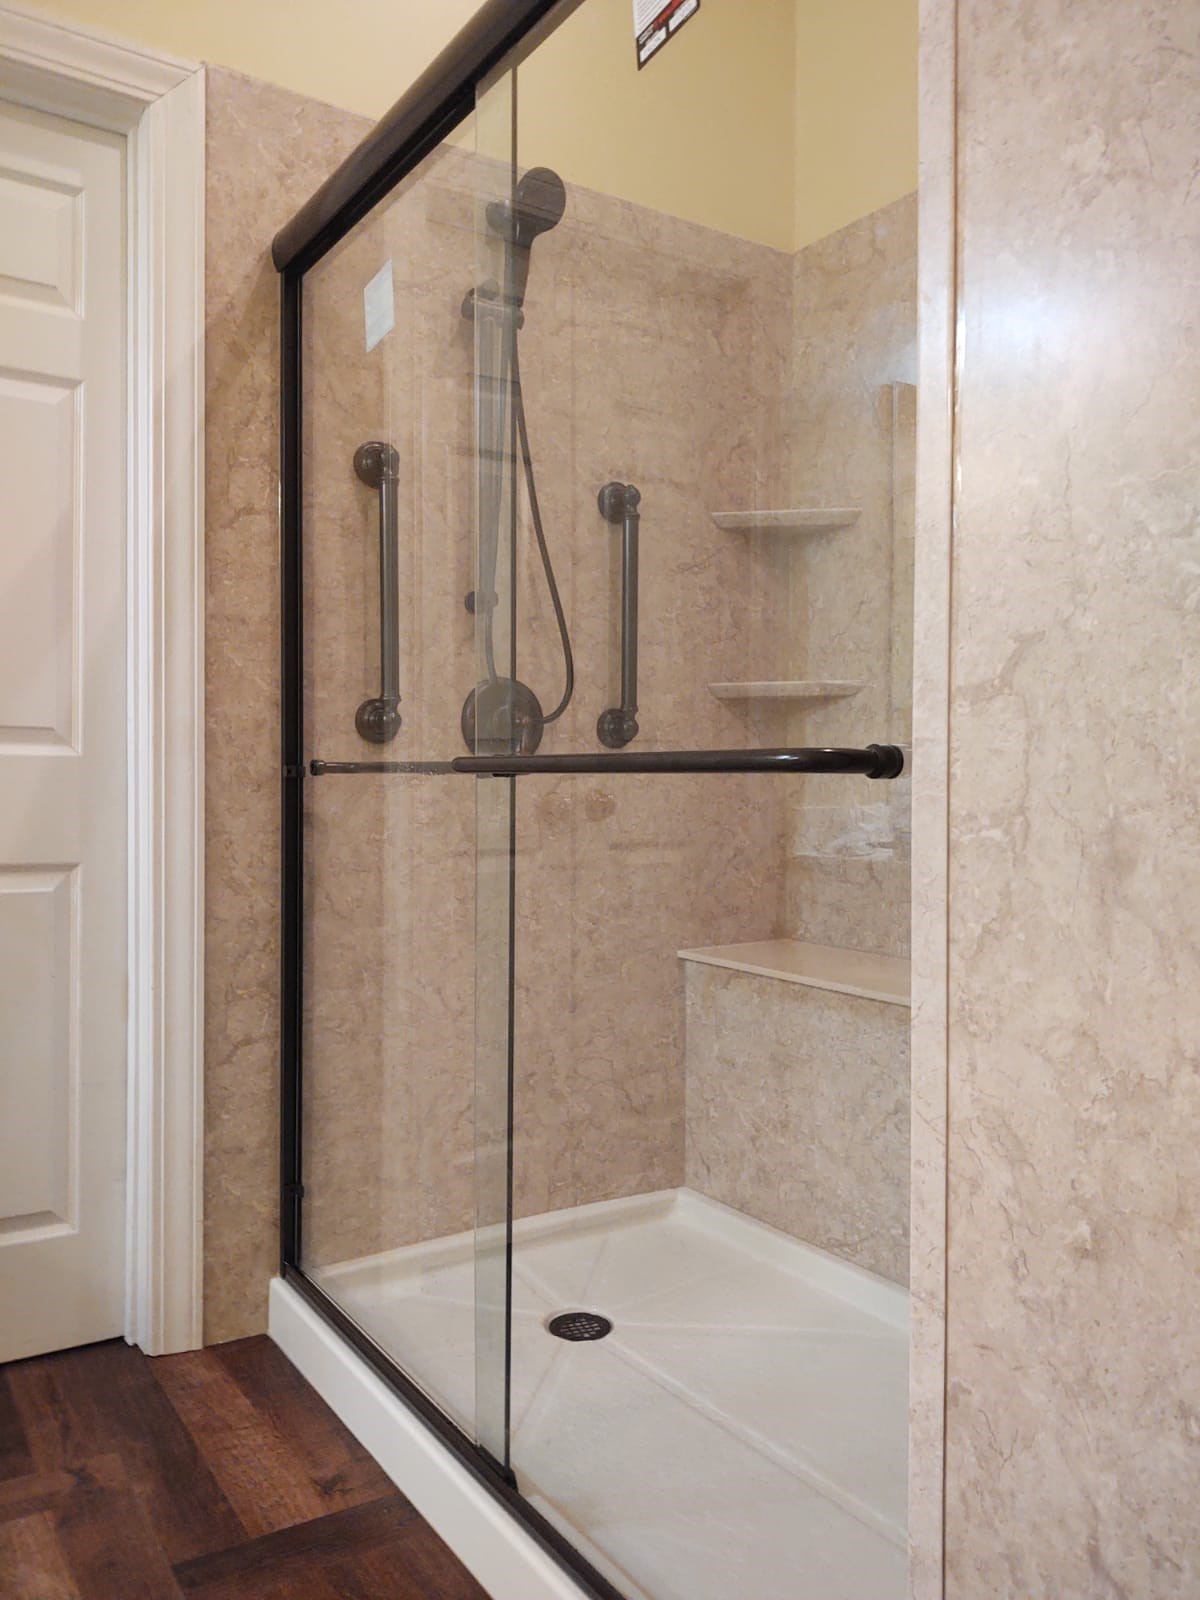 Replace Your Old Tub with a Brand New Shower!